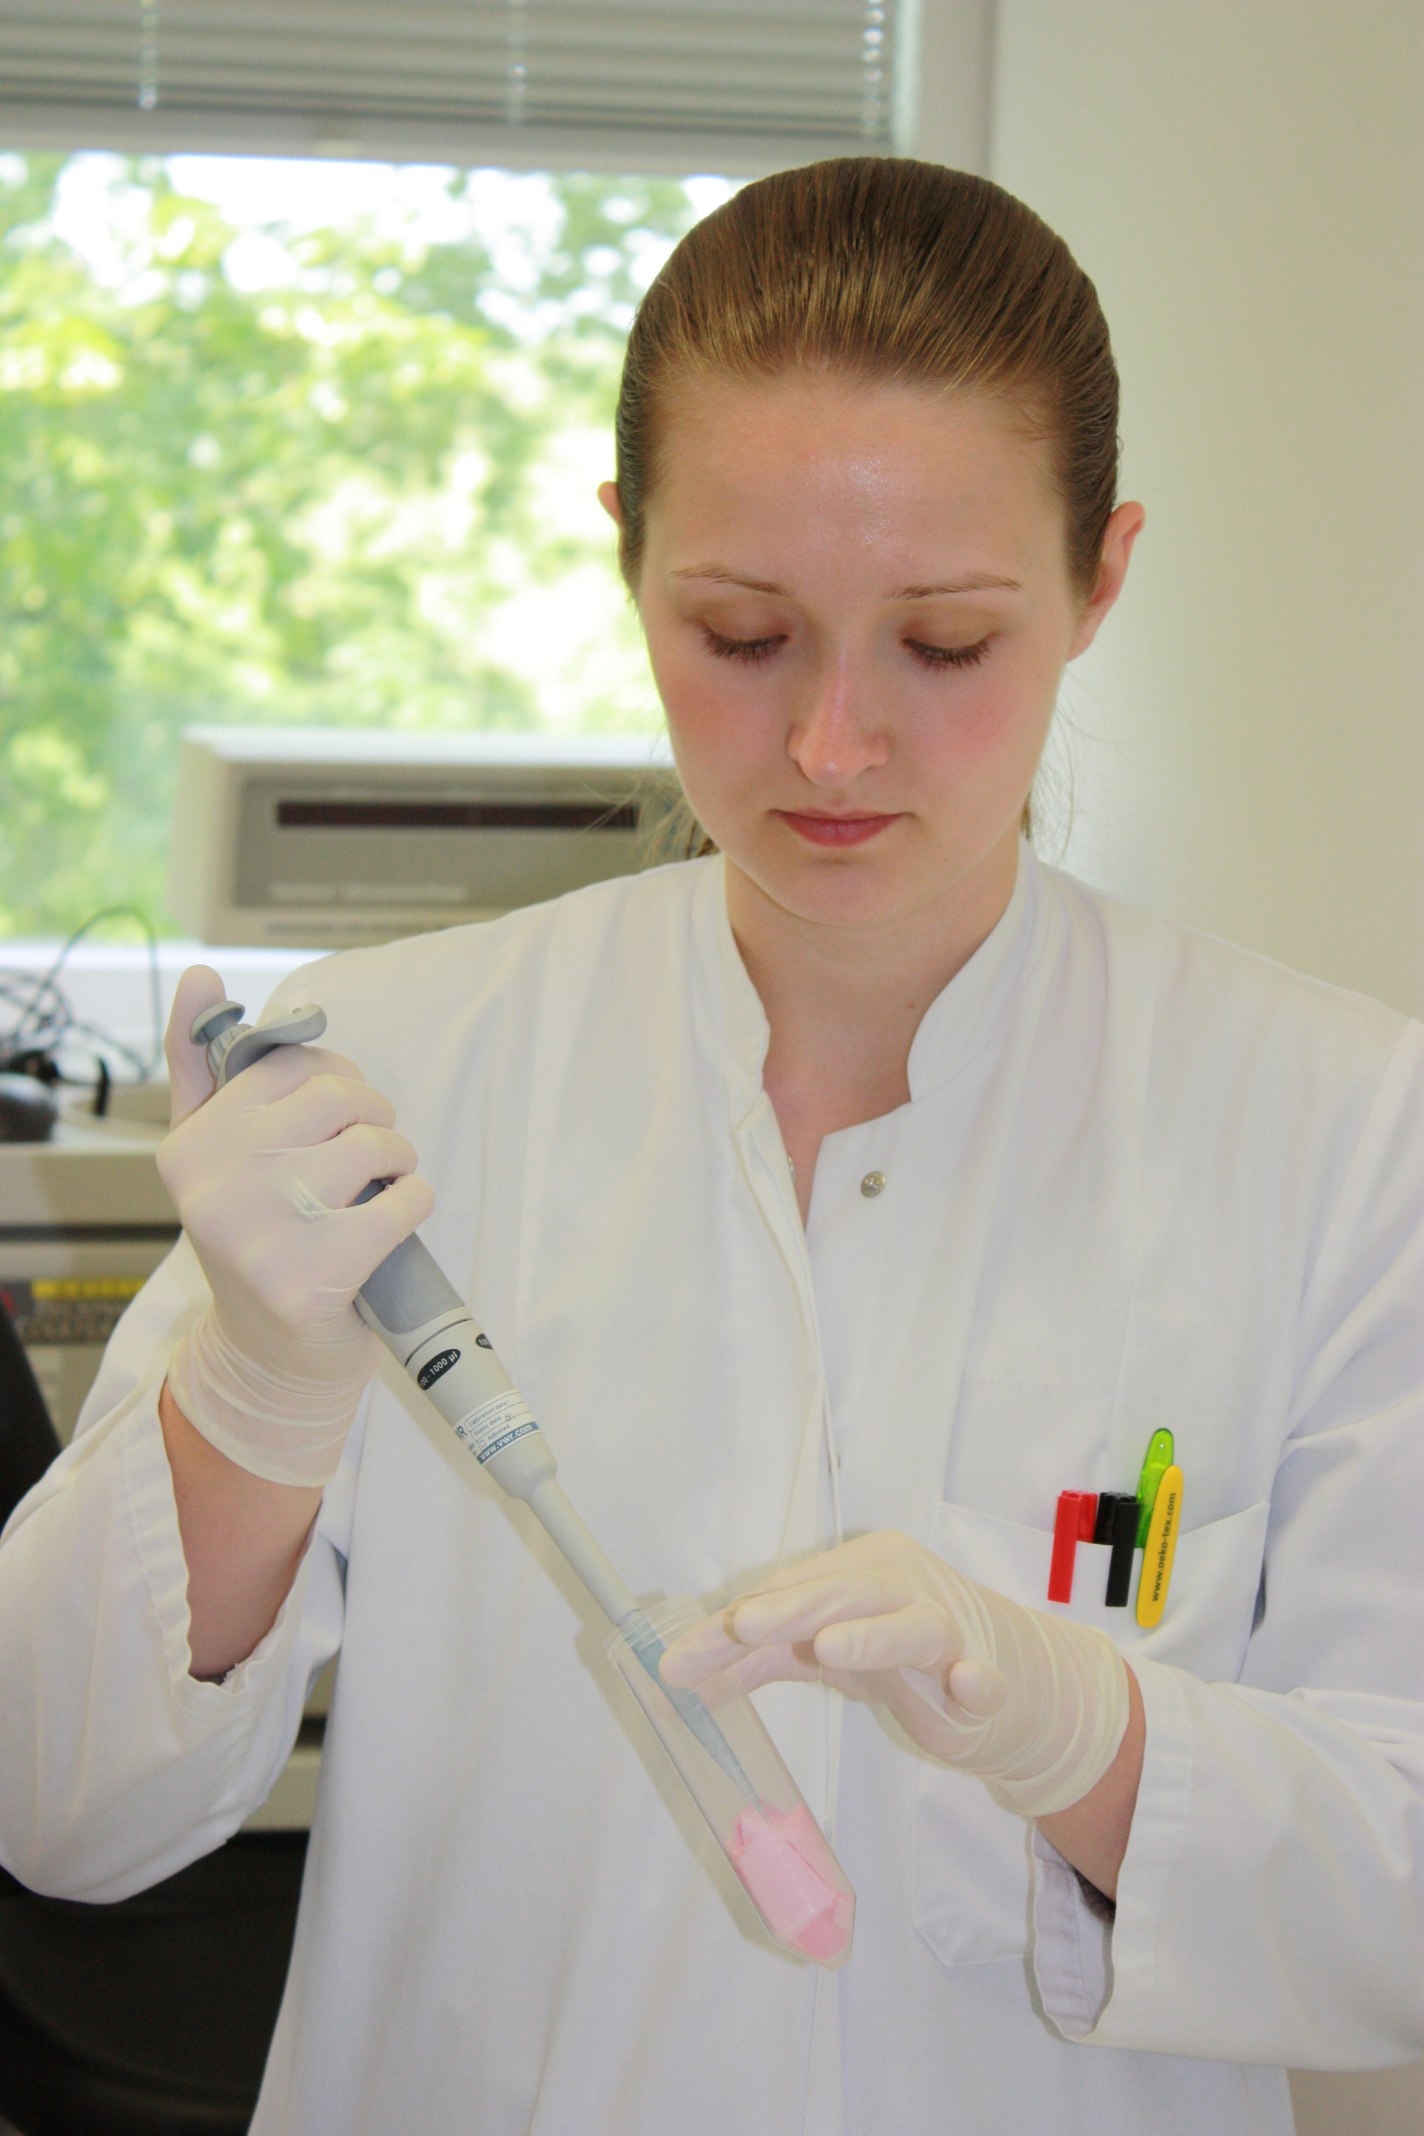 The photo shows a woman in a lab coat pipetting substances.